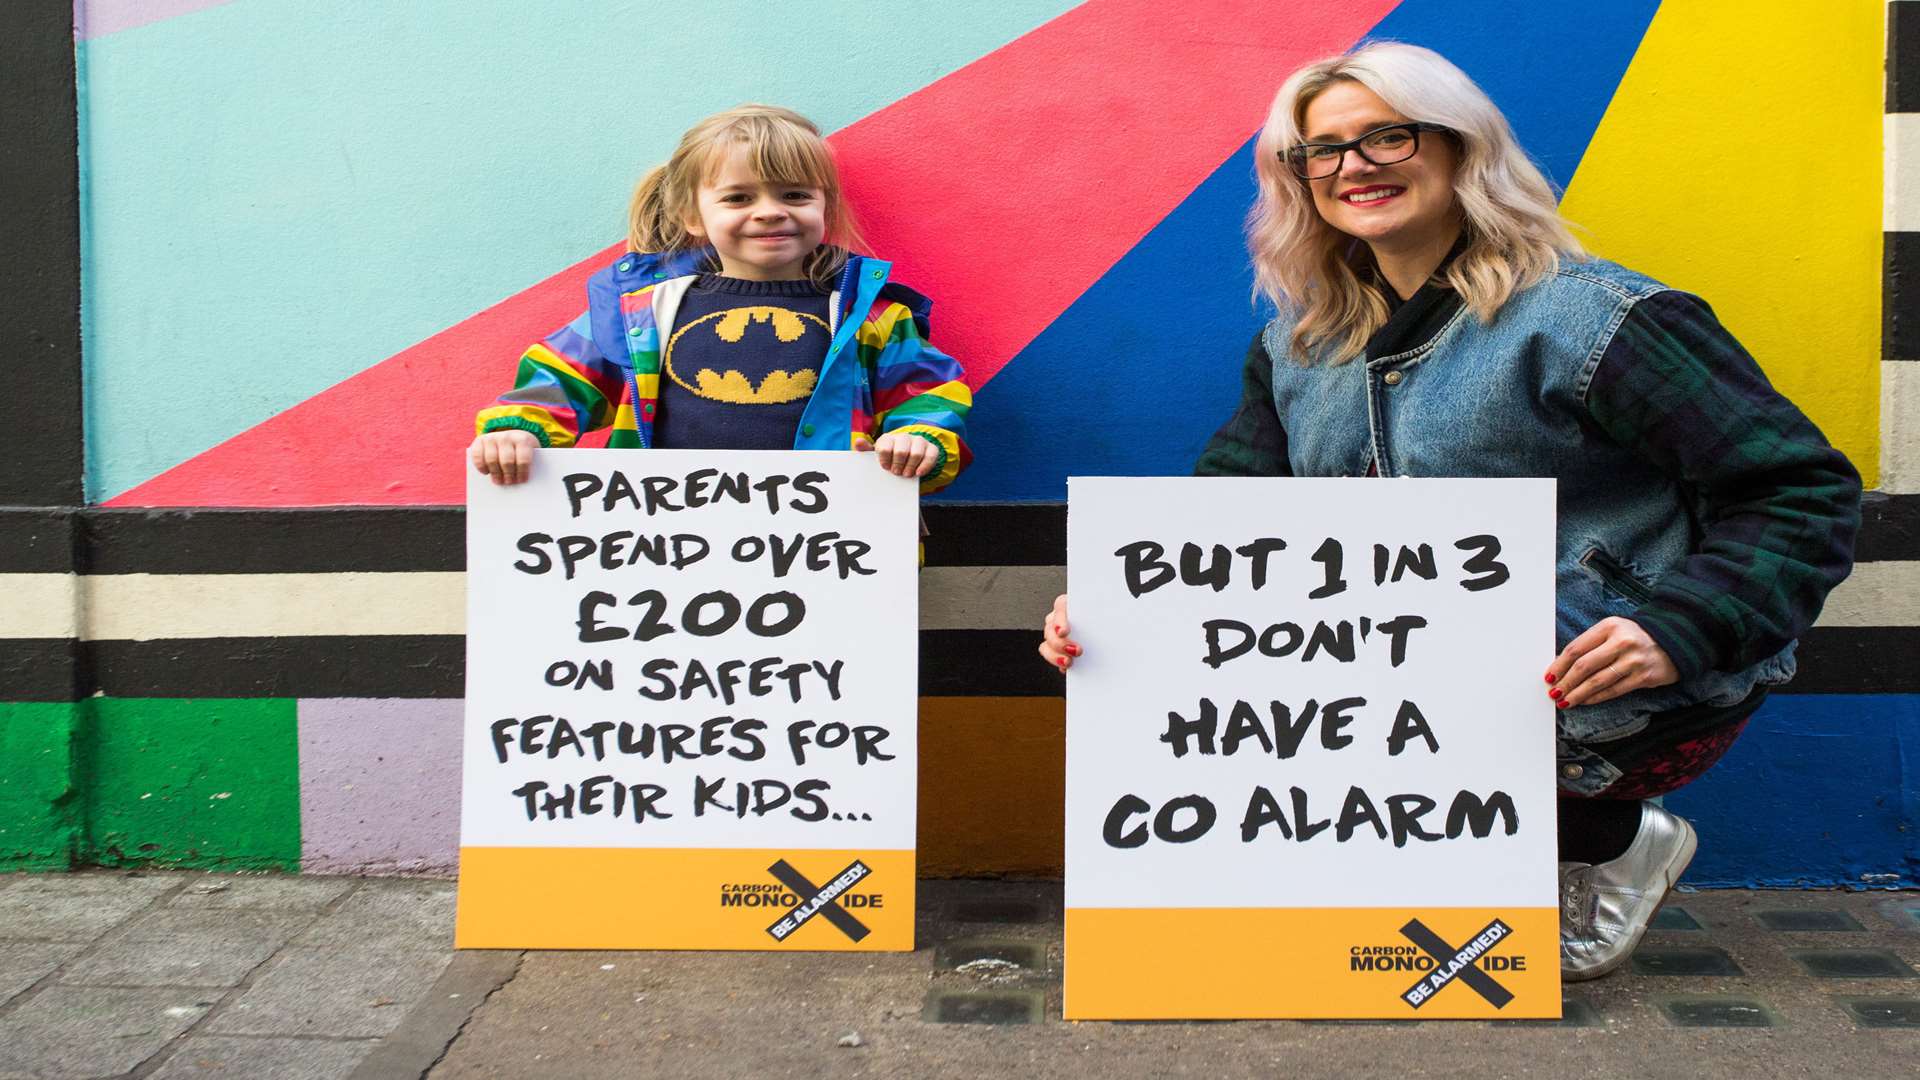 Parenting vlogger Anna Whitehouse is backing the CO Be Alarmed! campaign